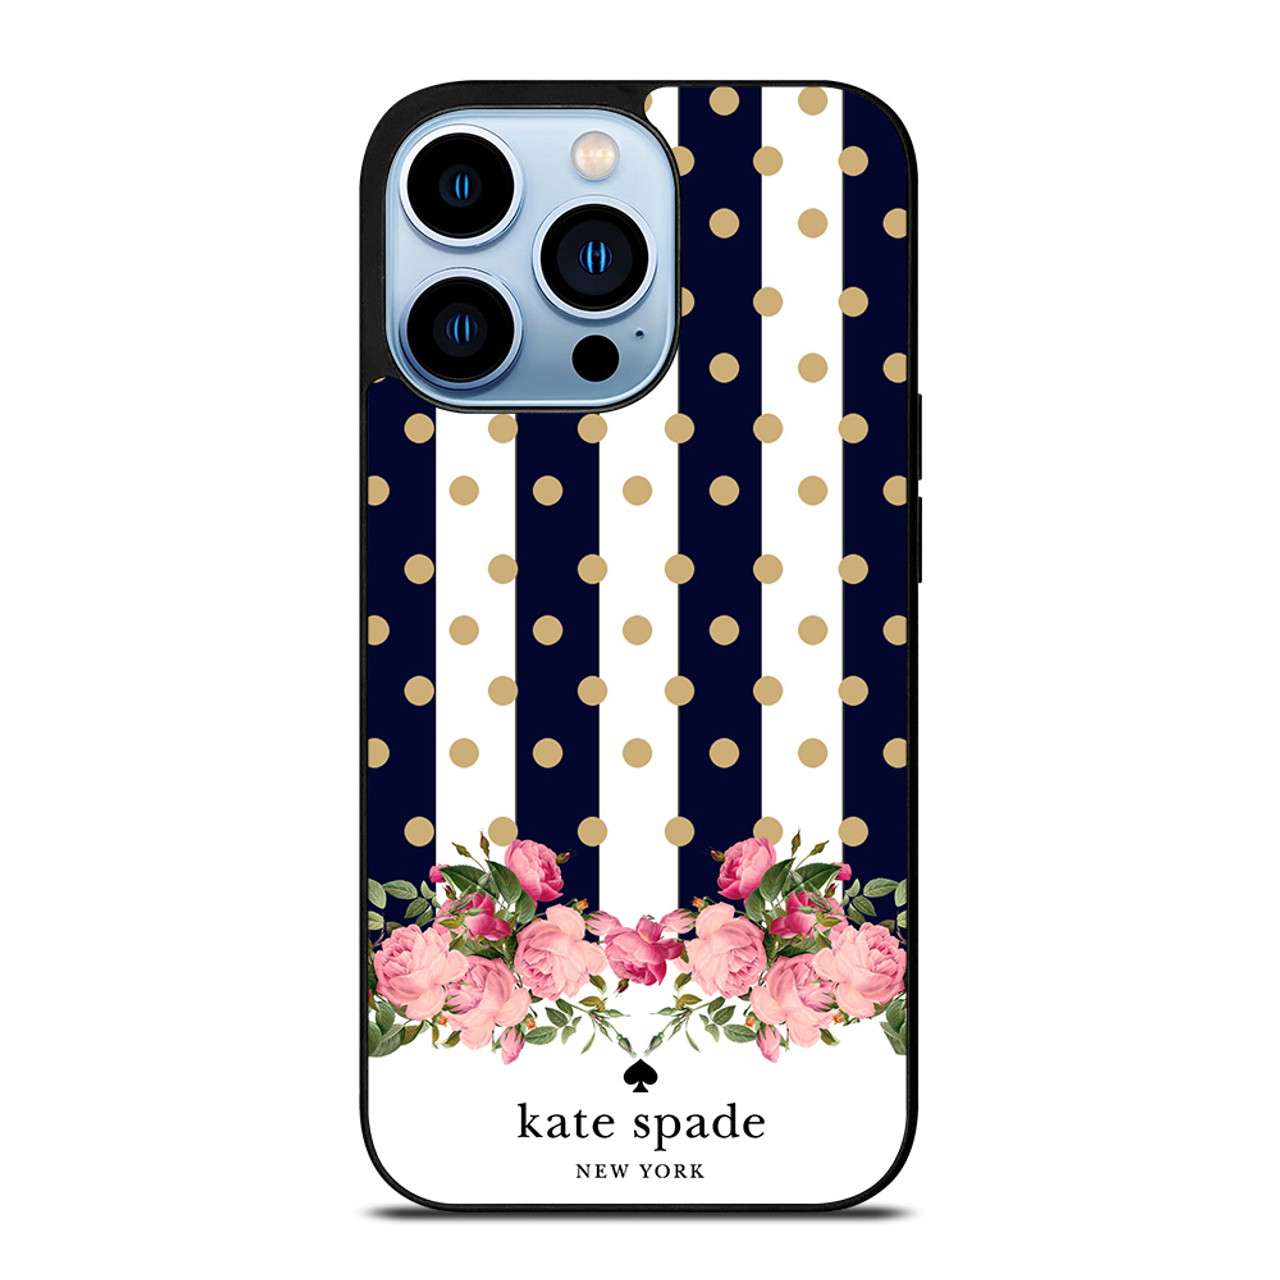 KATE SPADE NEW YORK POLKADOTS FLORAL iPhone 13 Pro Max Case Cover